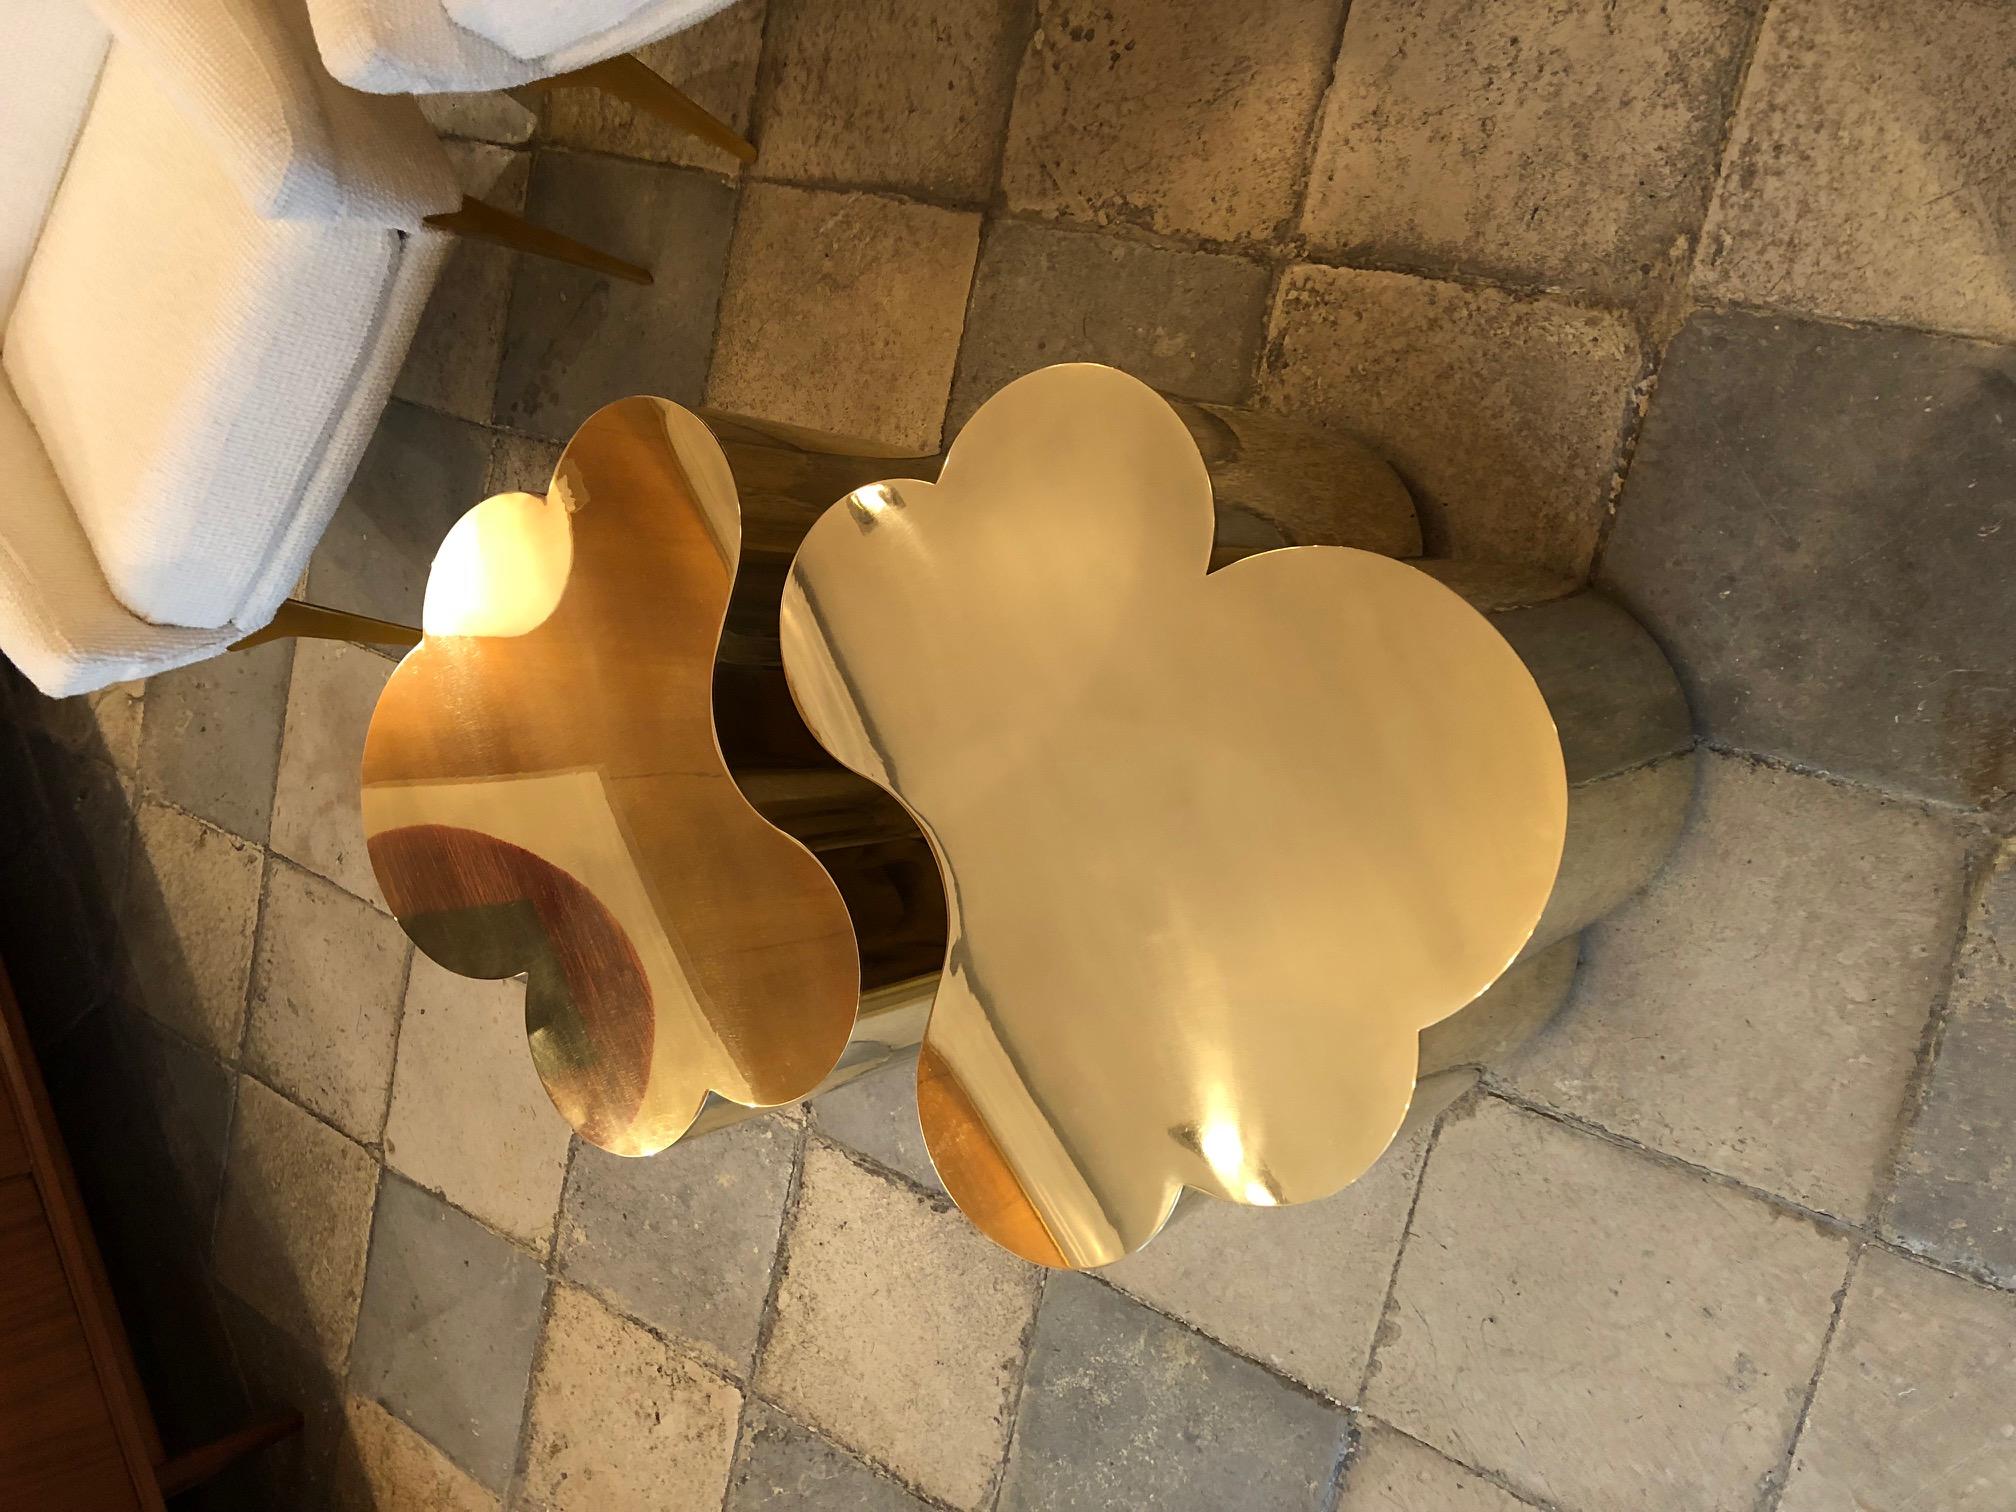 Two coffee tables in brass designed by Edouard De La Marque. They can fit together forming a large coffee table or on each side as end tables. Dimensions indicated below are per table (as shown on the main picture, overall dimensions are: L 108, D